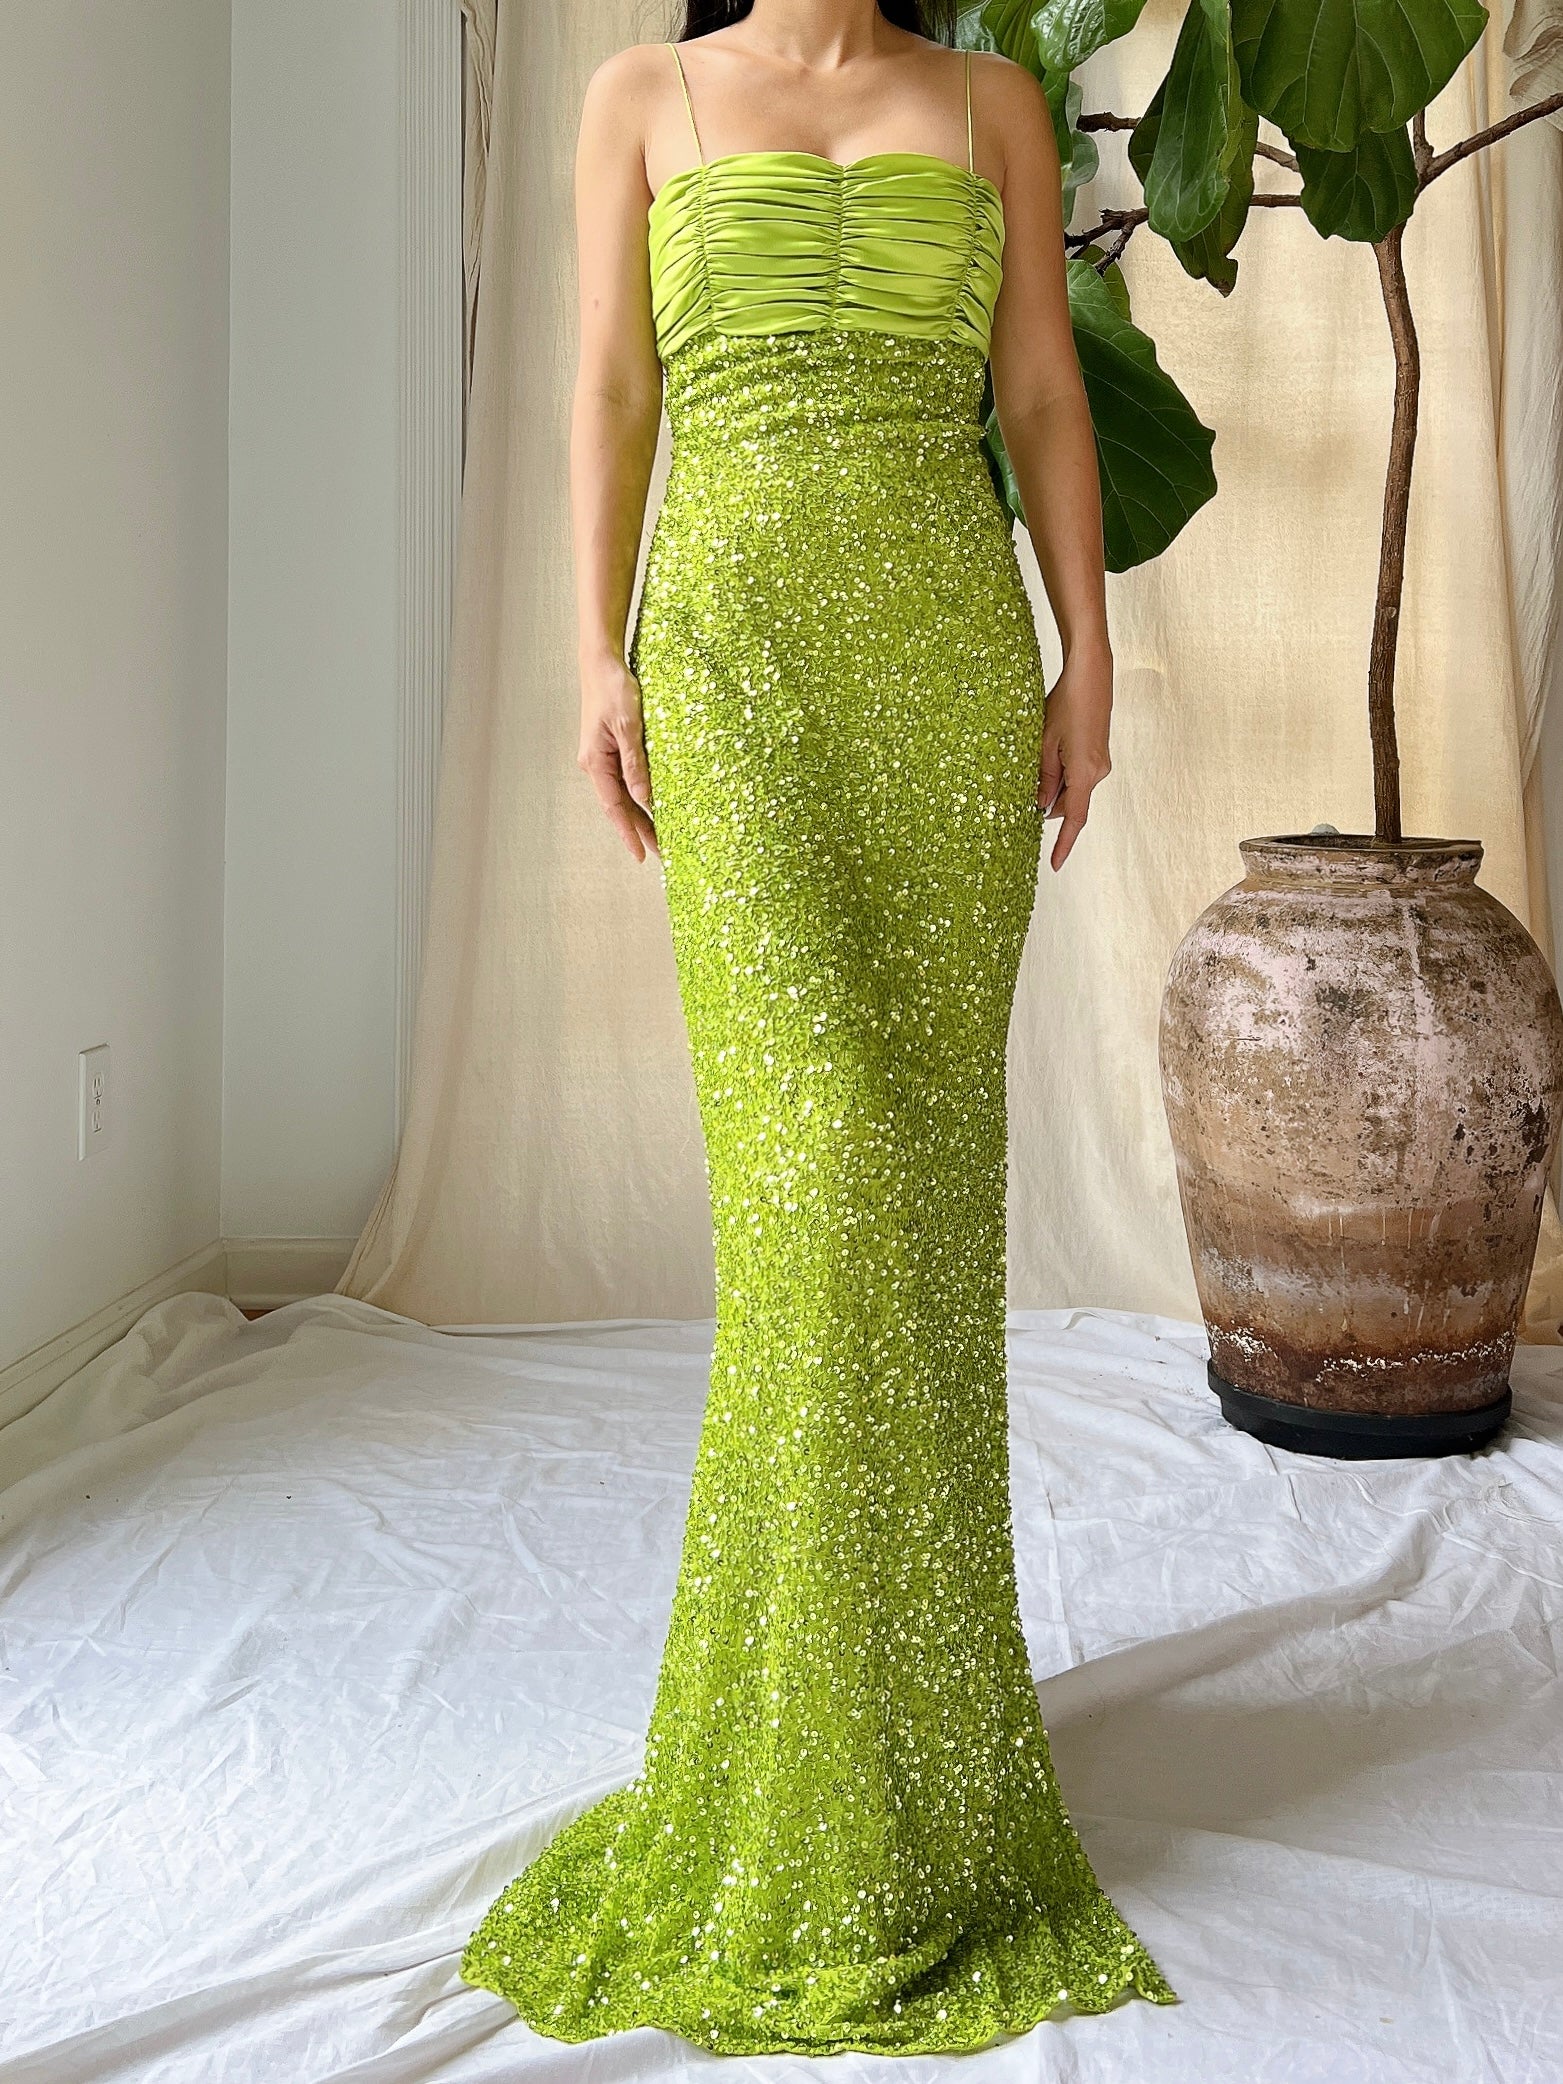 1990s Lime Green Sequins Gown - XS